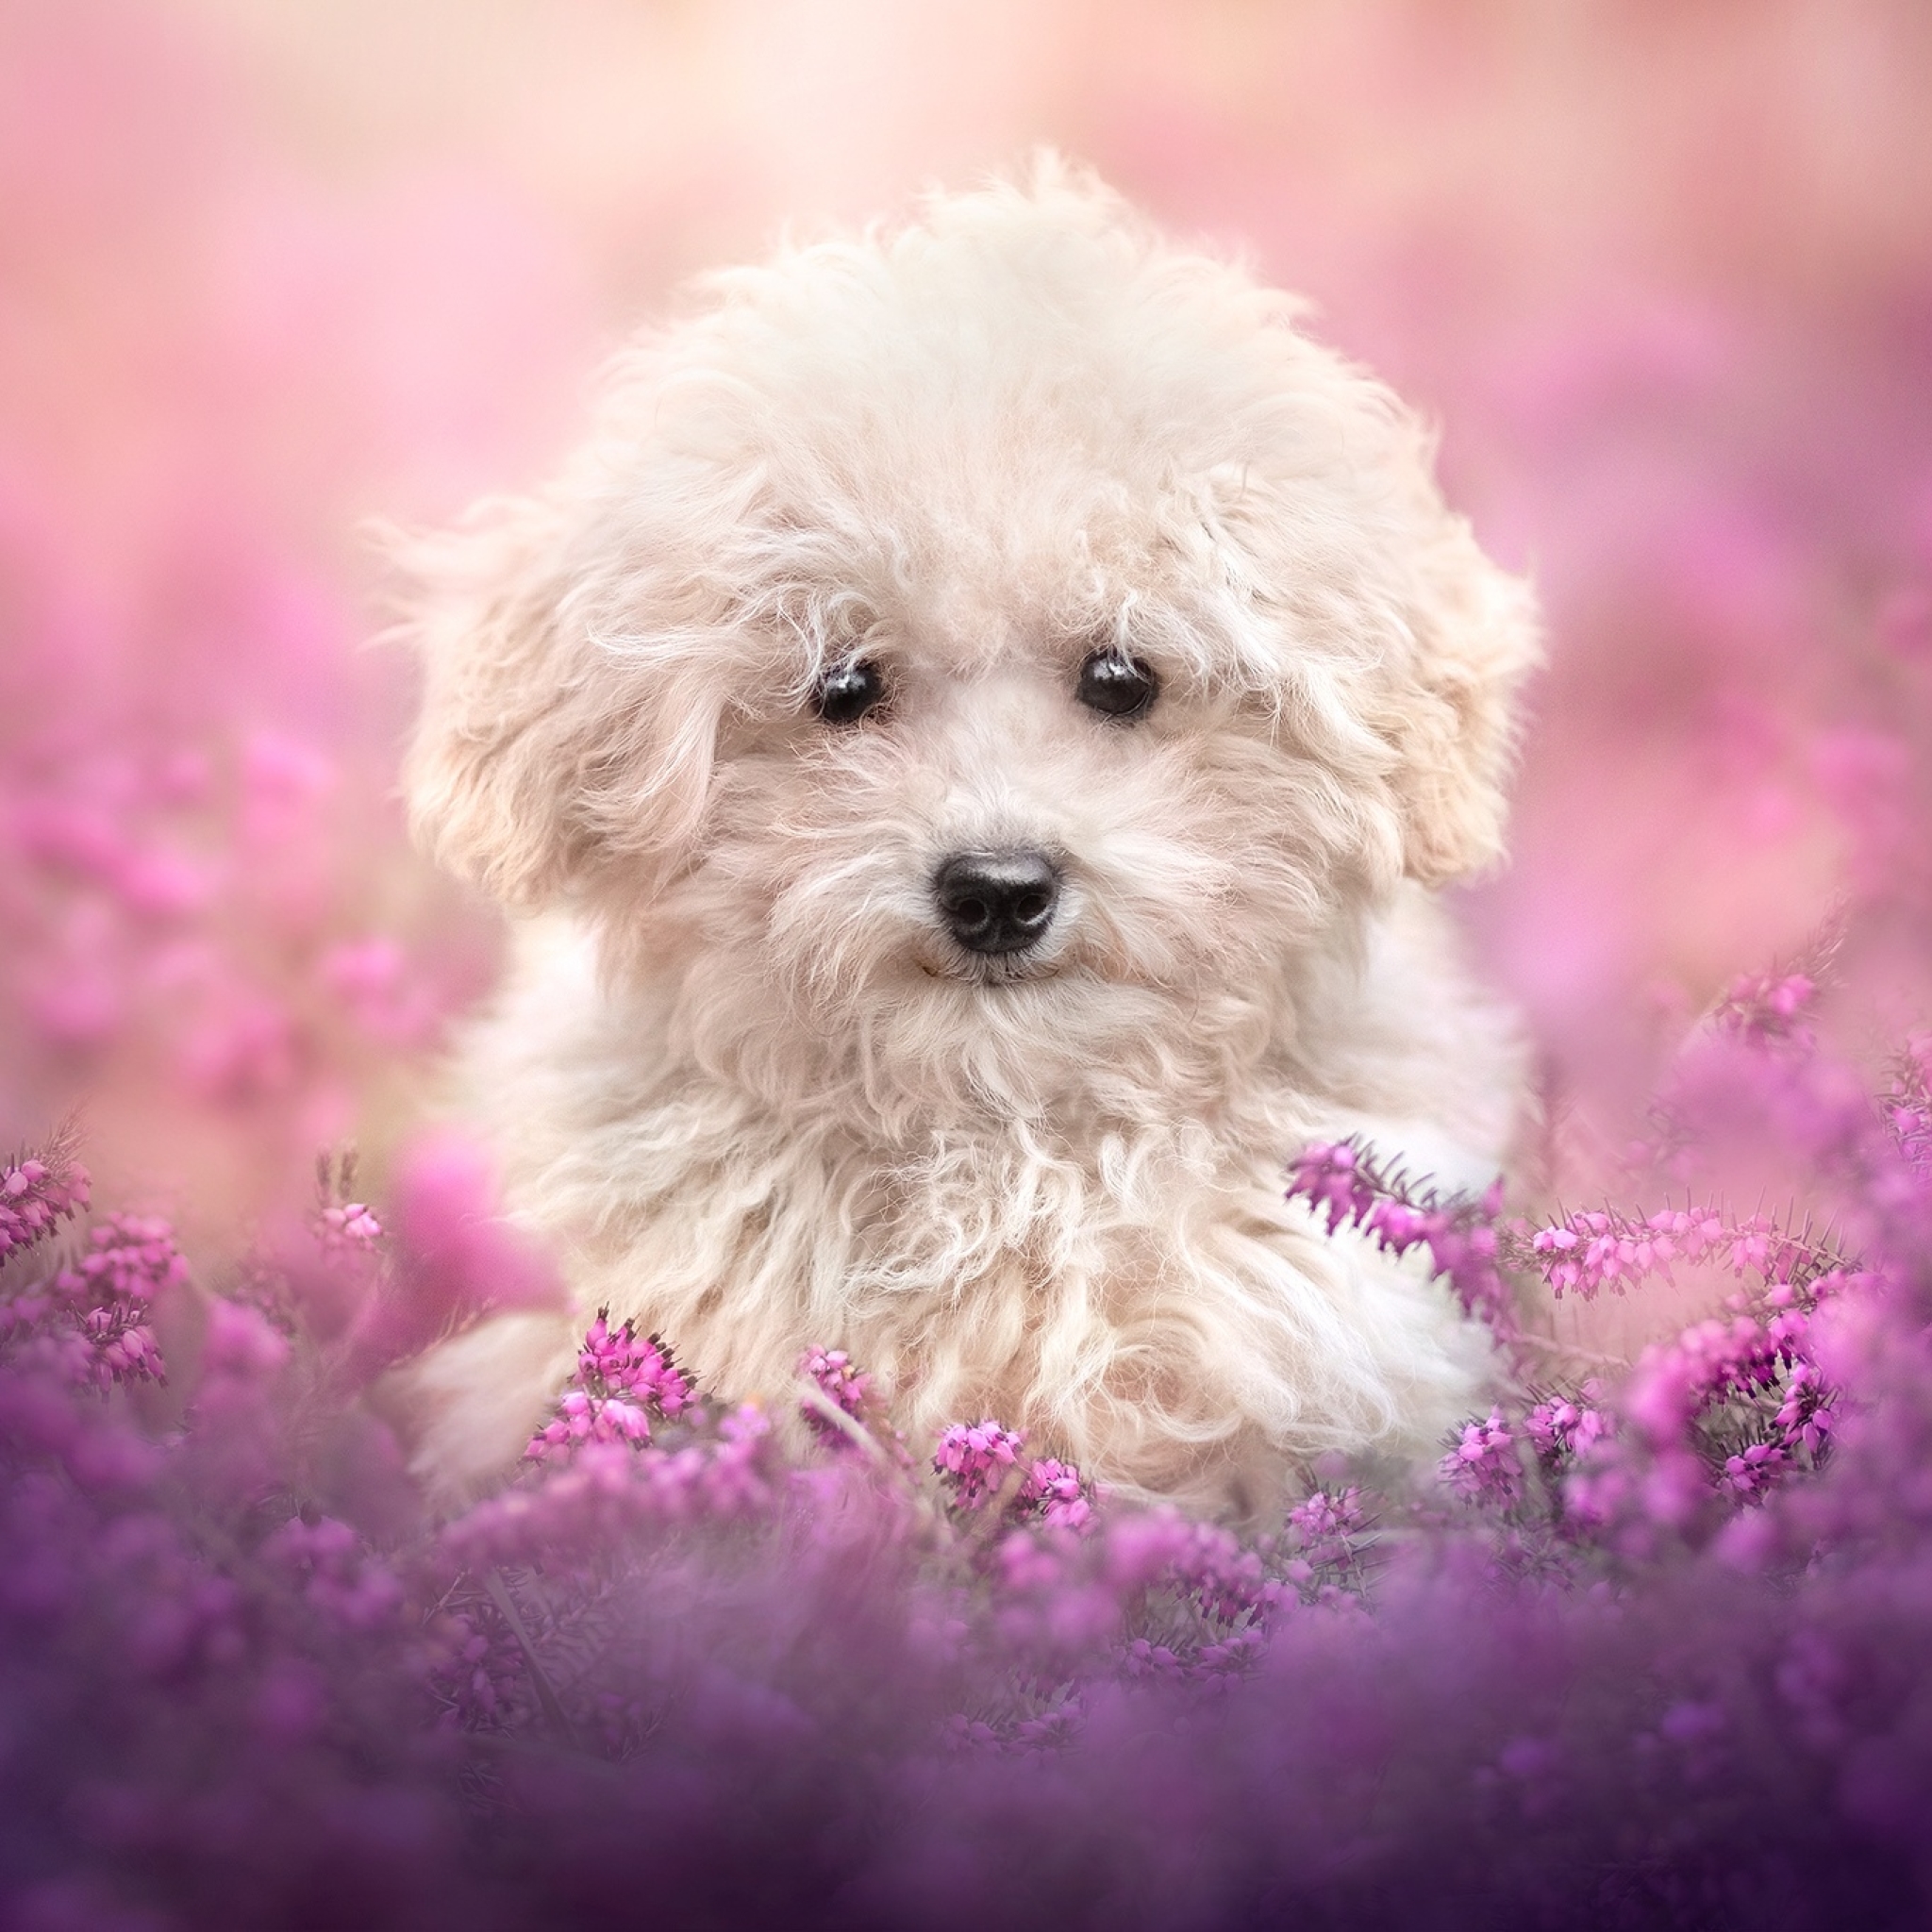 basicwasp382 3D Rendering cute dog isolated on colorful background  suitable for use as icon avatar